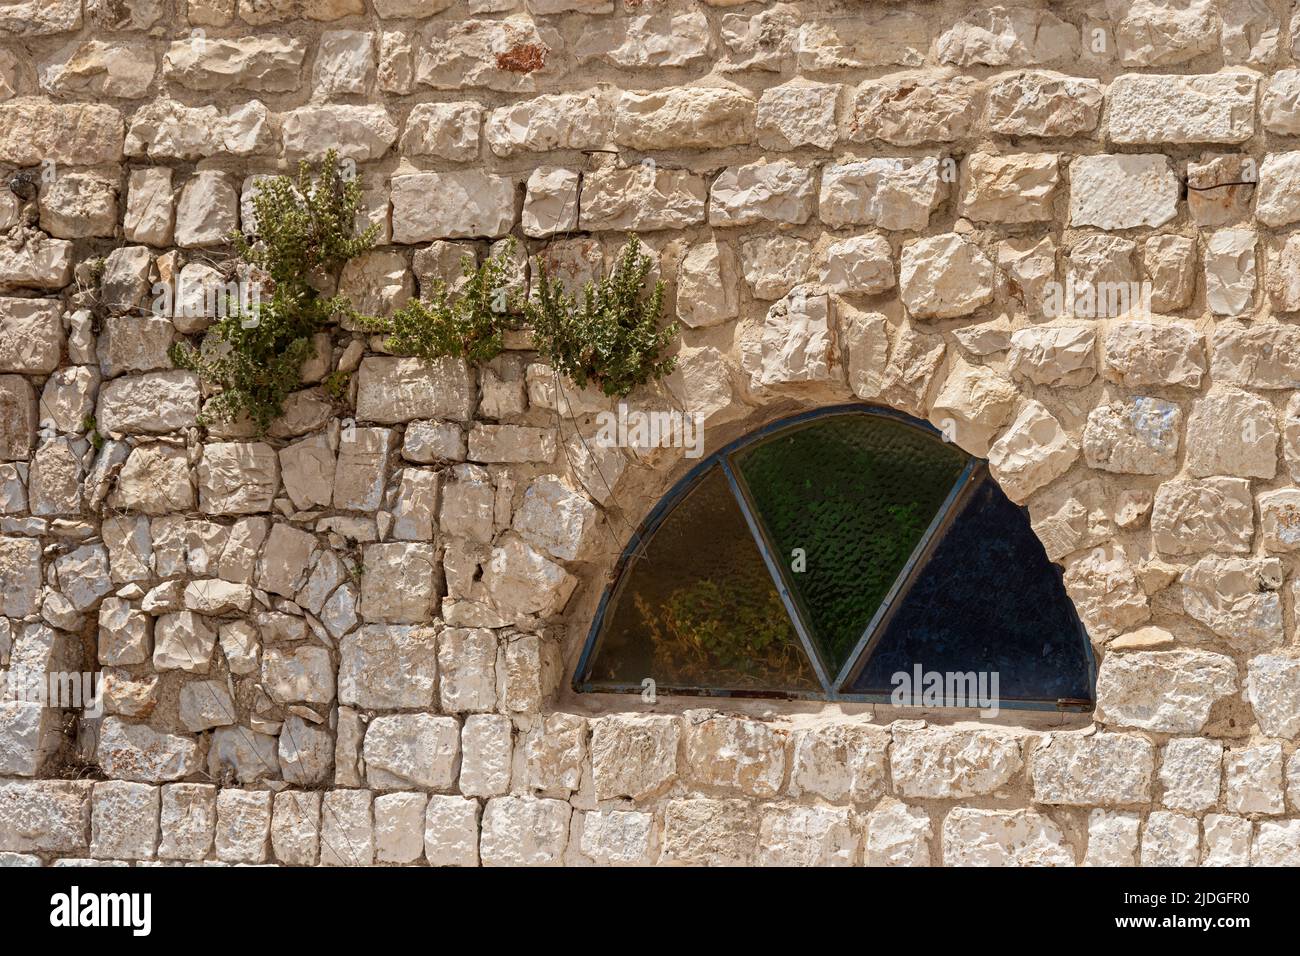 plants grow in cracks in an ancient limestone wall in Safed Tsfat in Israel next to a half circle window with colored glass triangles Stock Photo